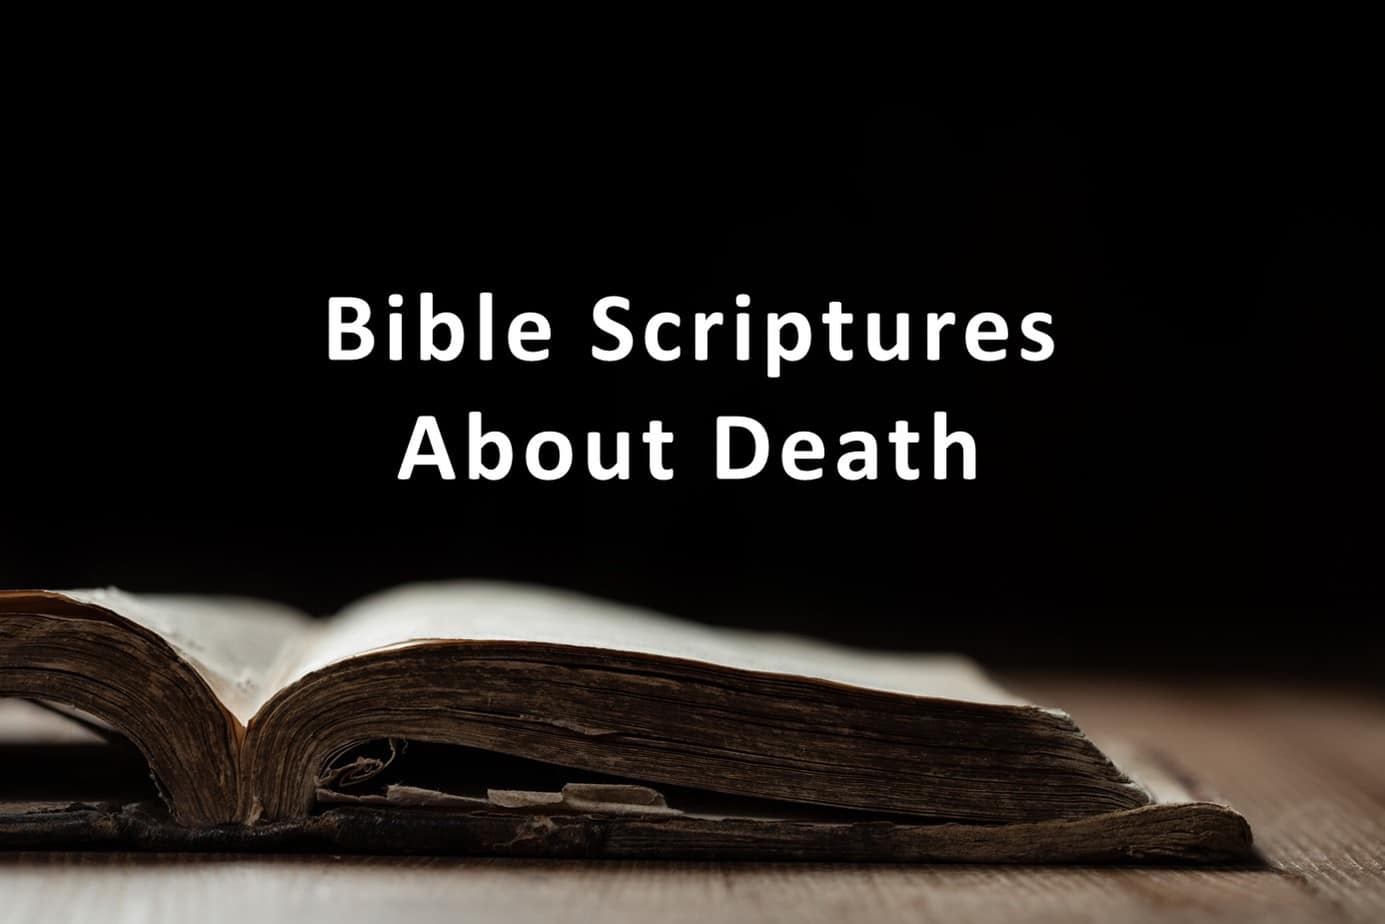 Bible On Table - Bible Verses About Death